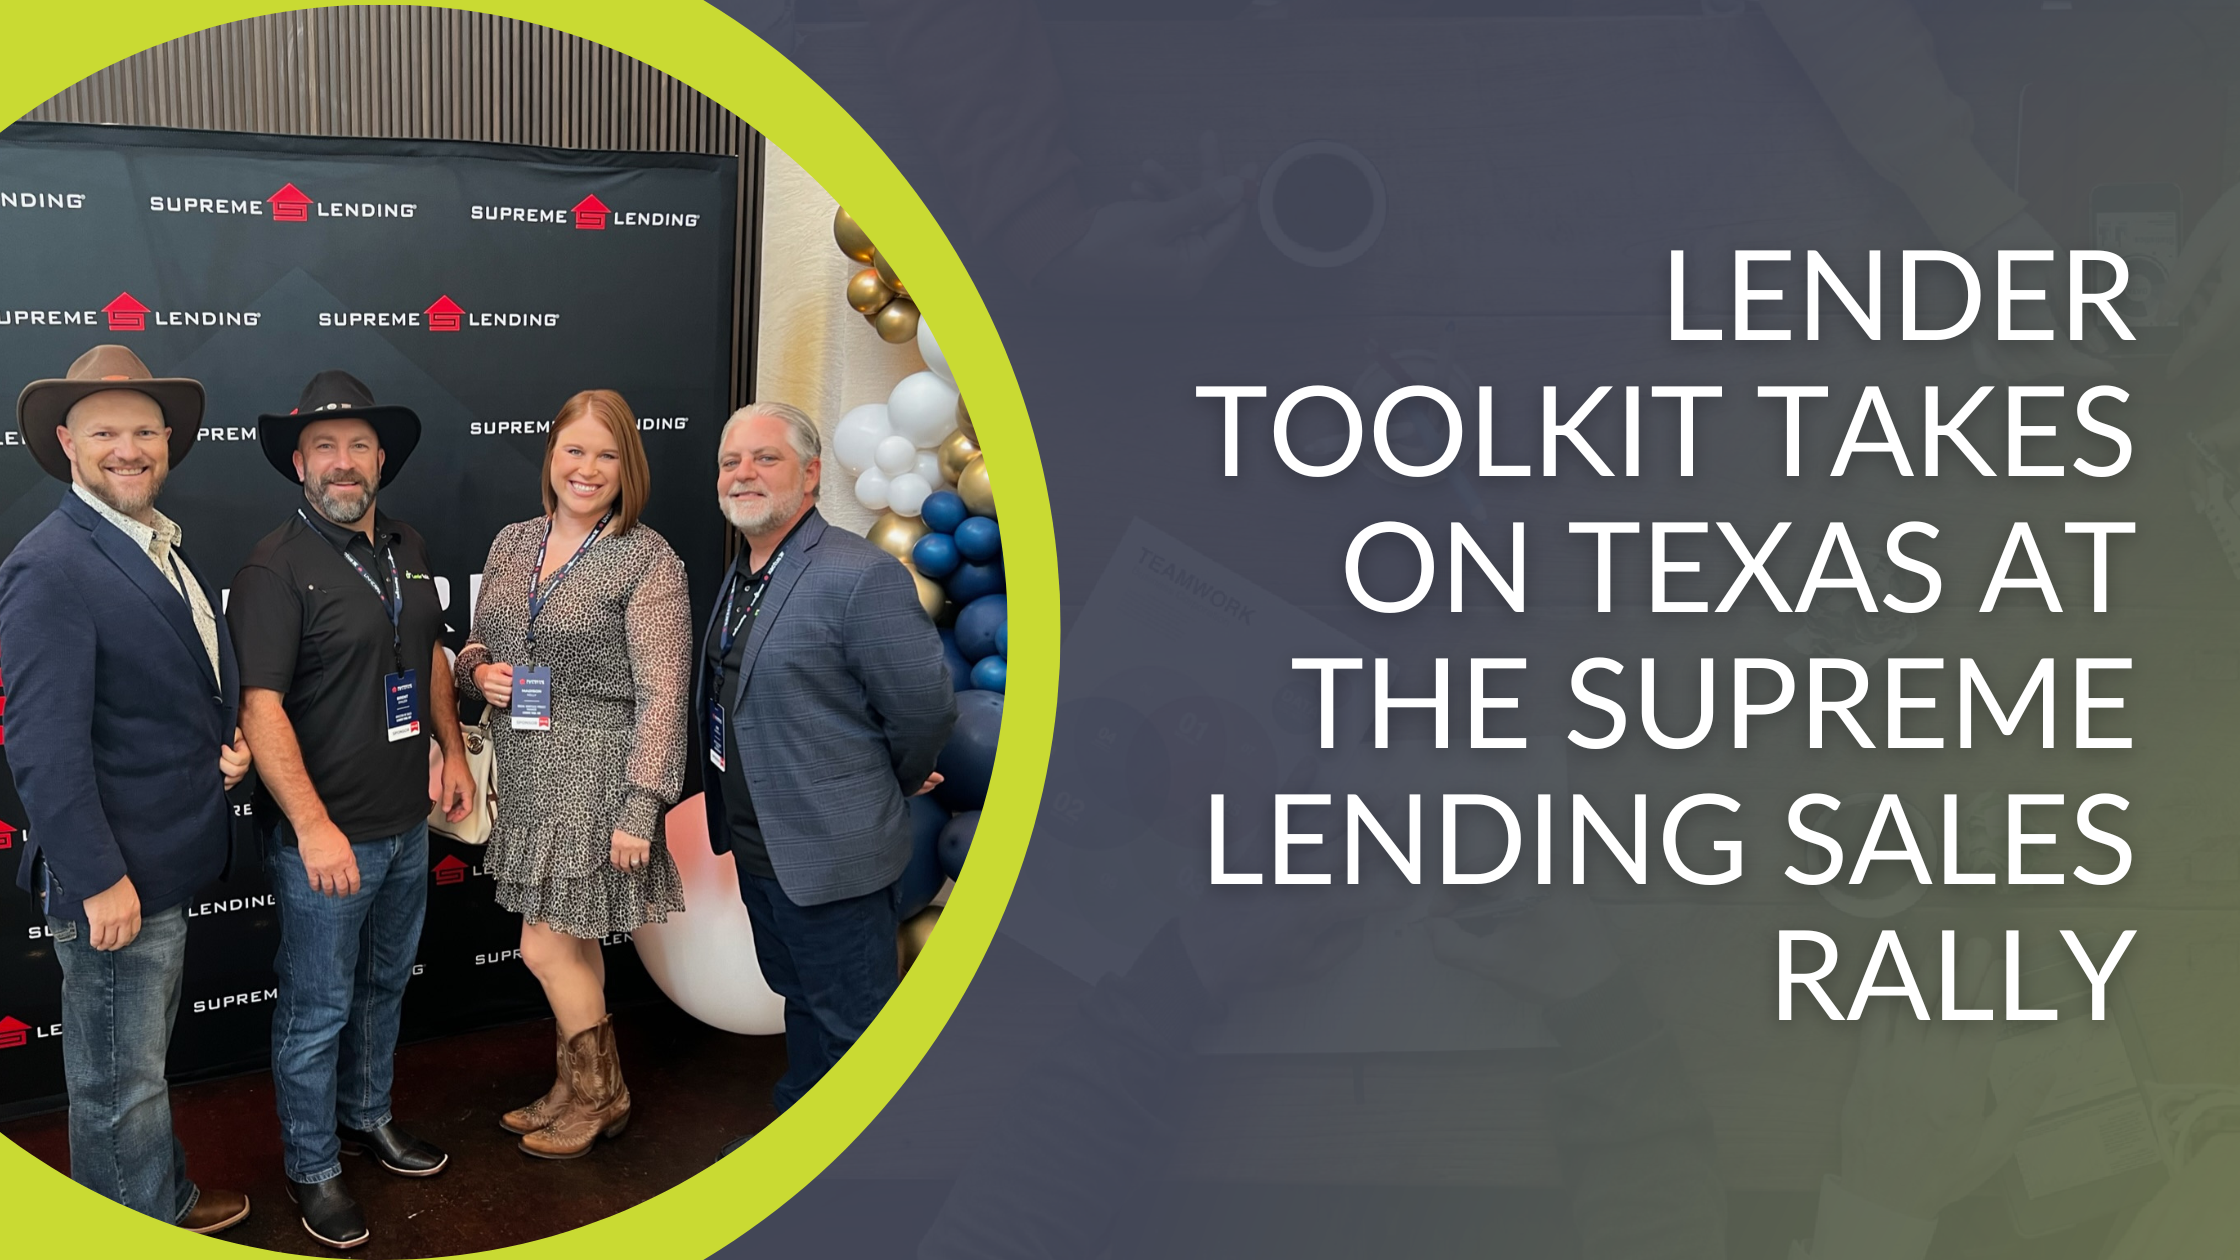 Lender Toolkit Takes on Texas at the Supreme Lending Sales Rally